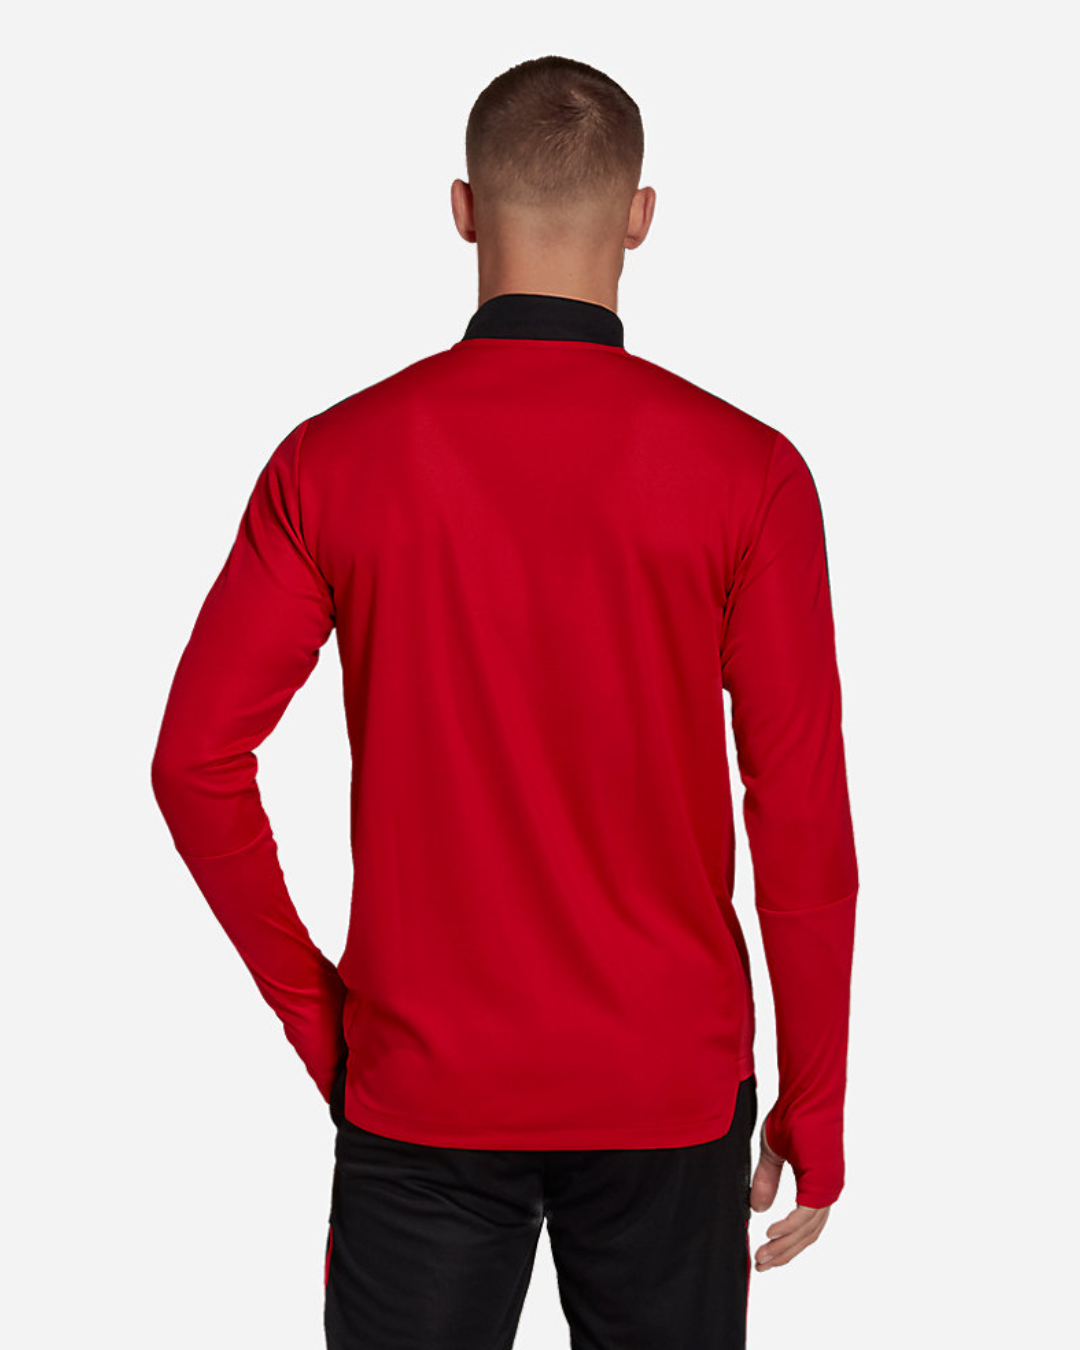 Manchester United training top 2021/2022 - Red/Black